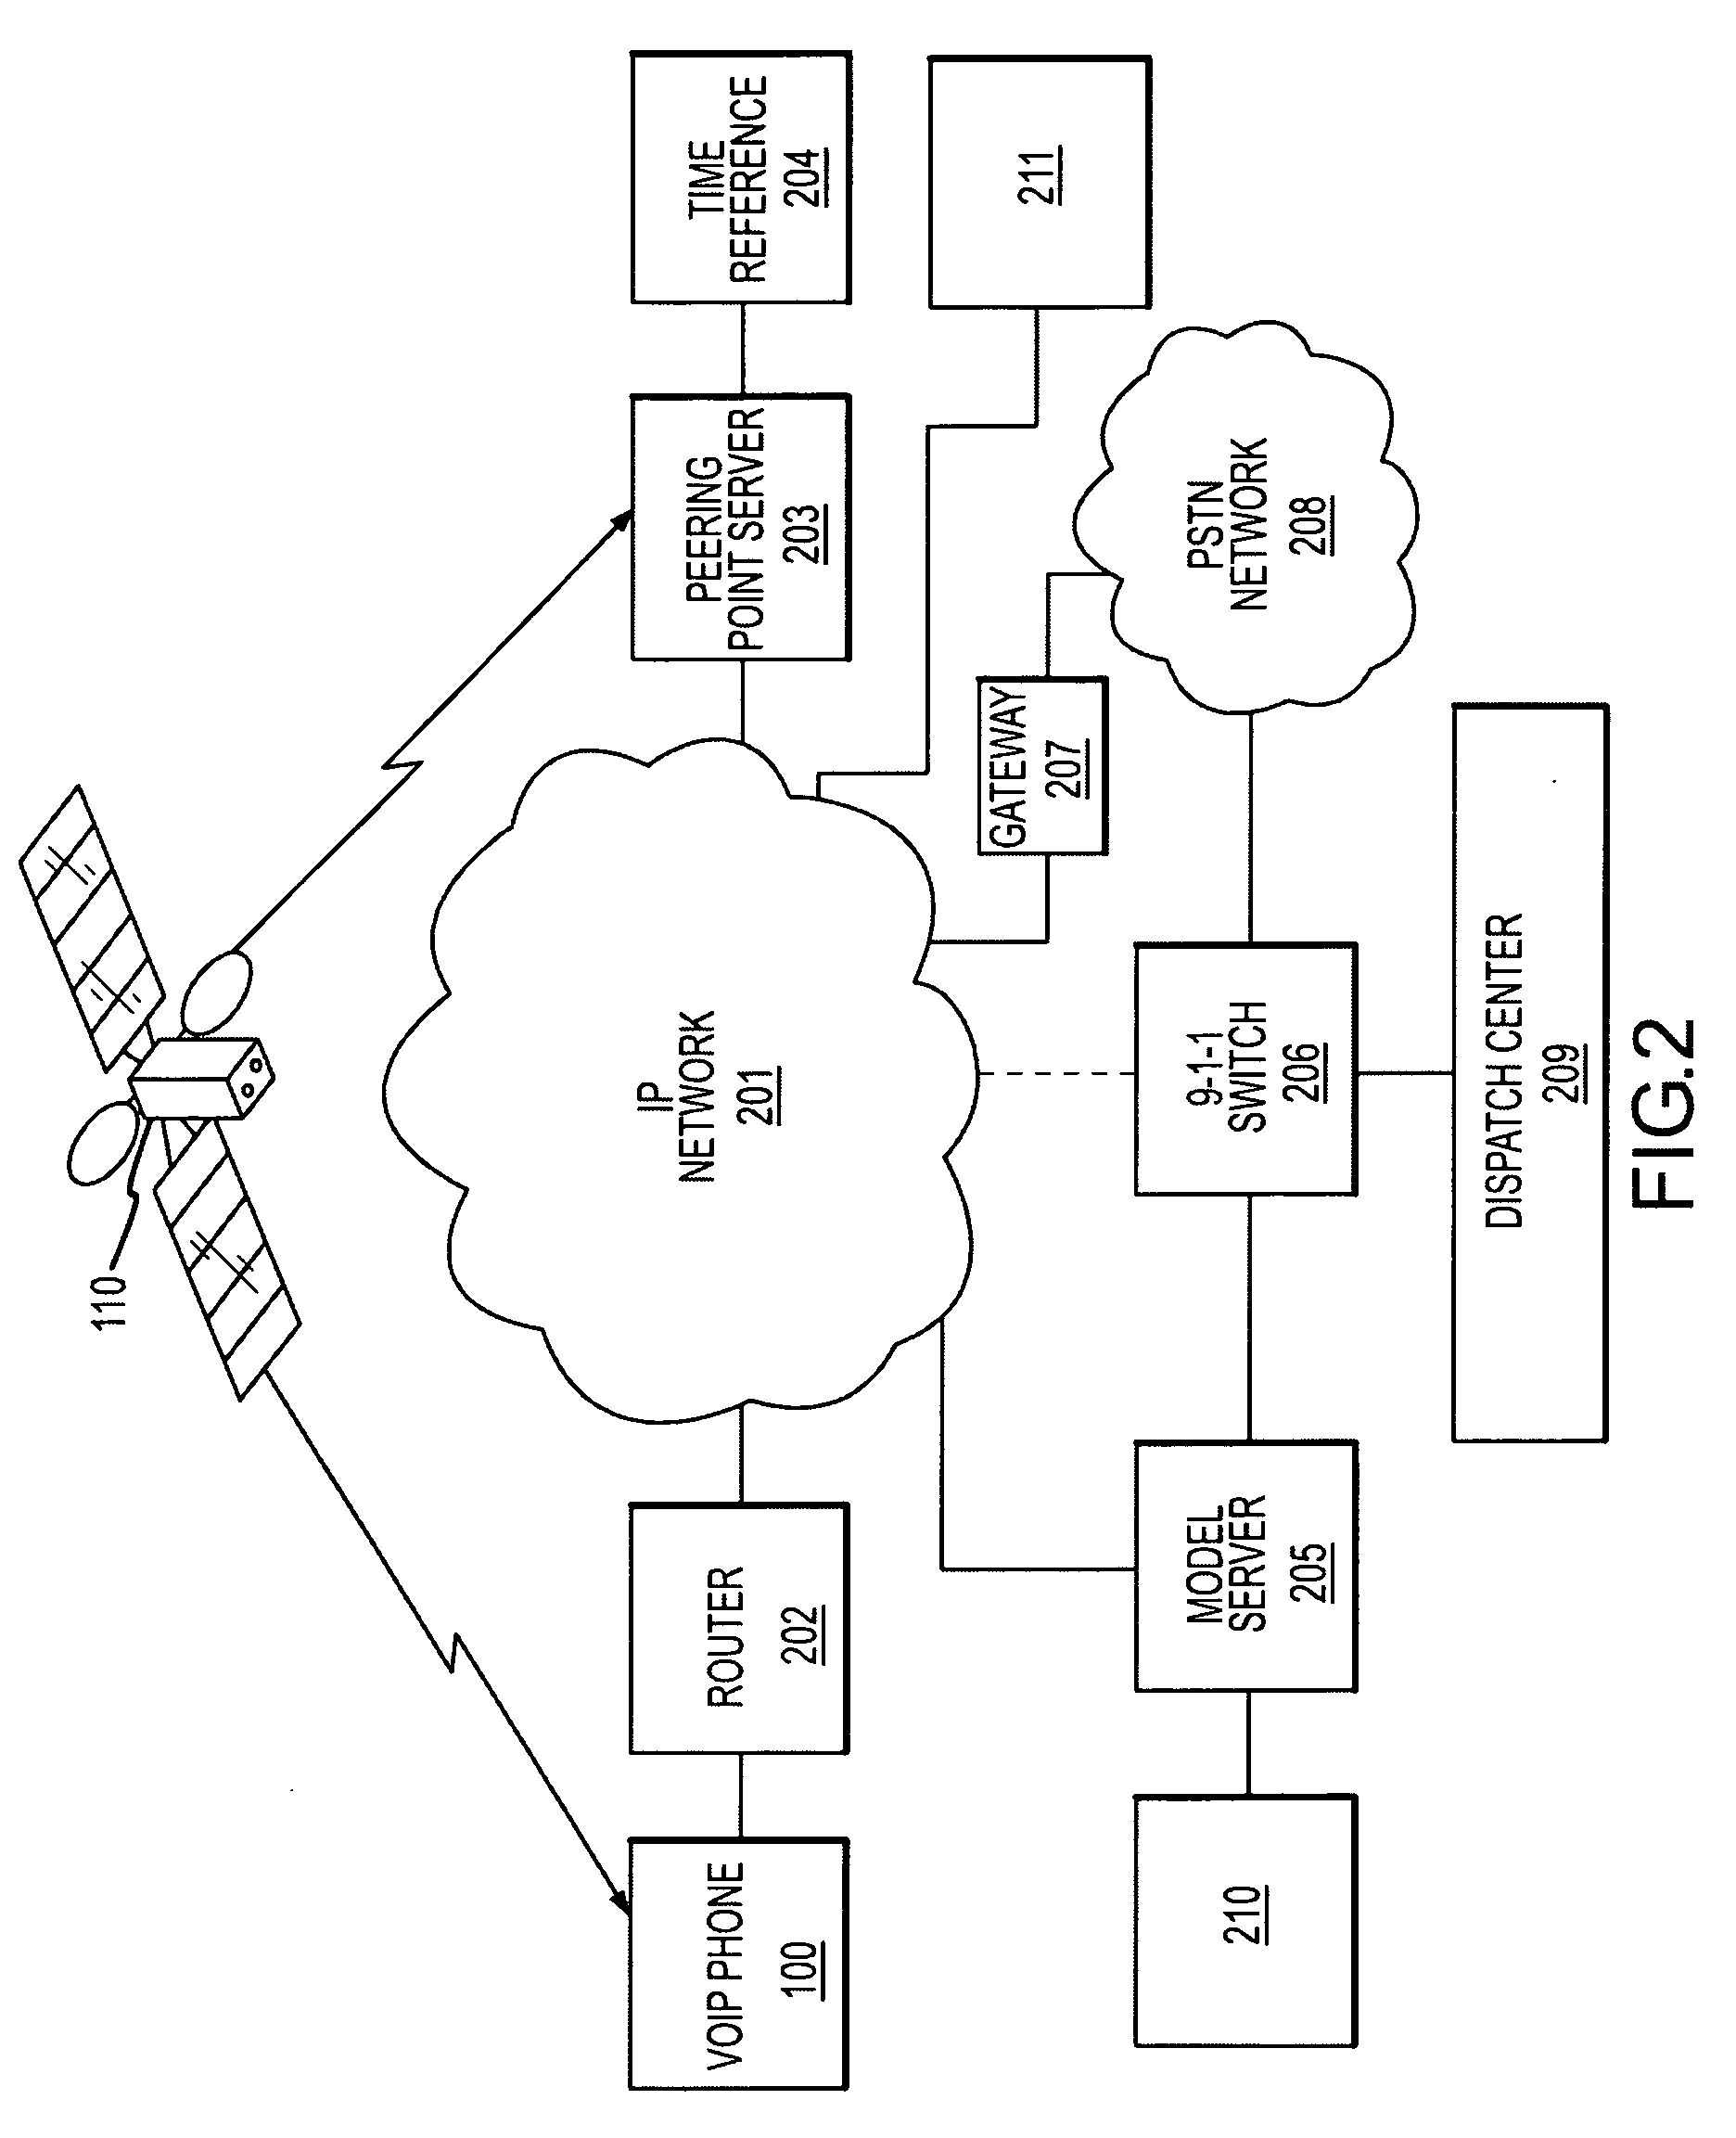 System and methods for IP and VoIP device location determination